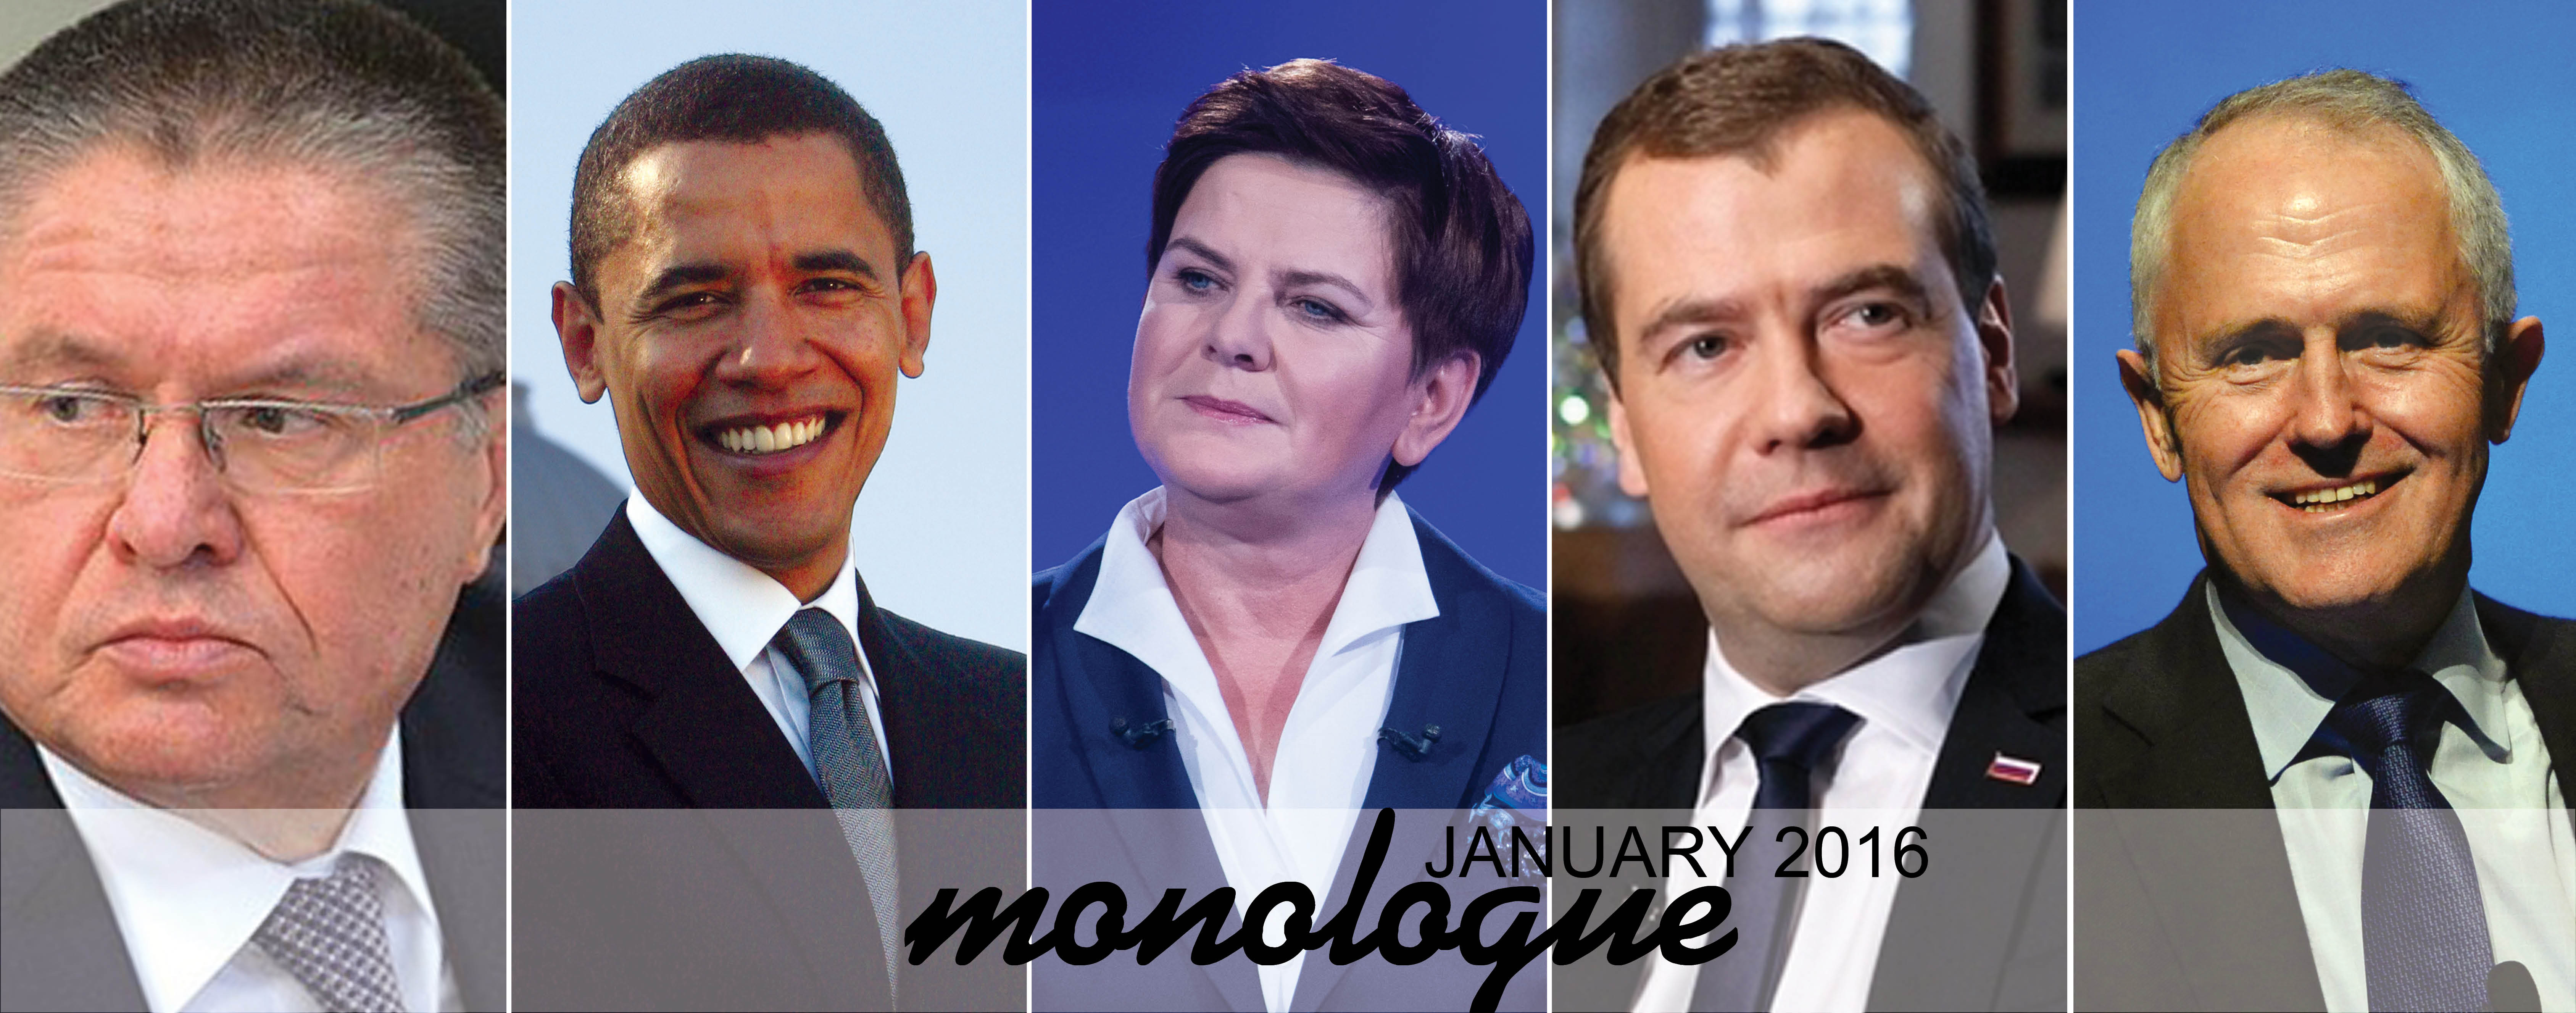 Monologue - People Speak – January 2016 March 2018 issue